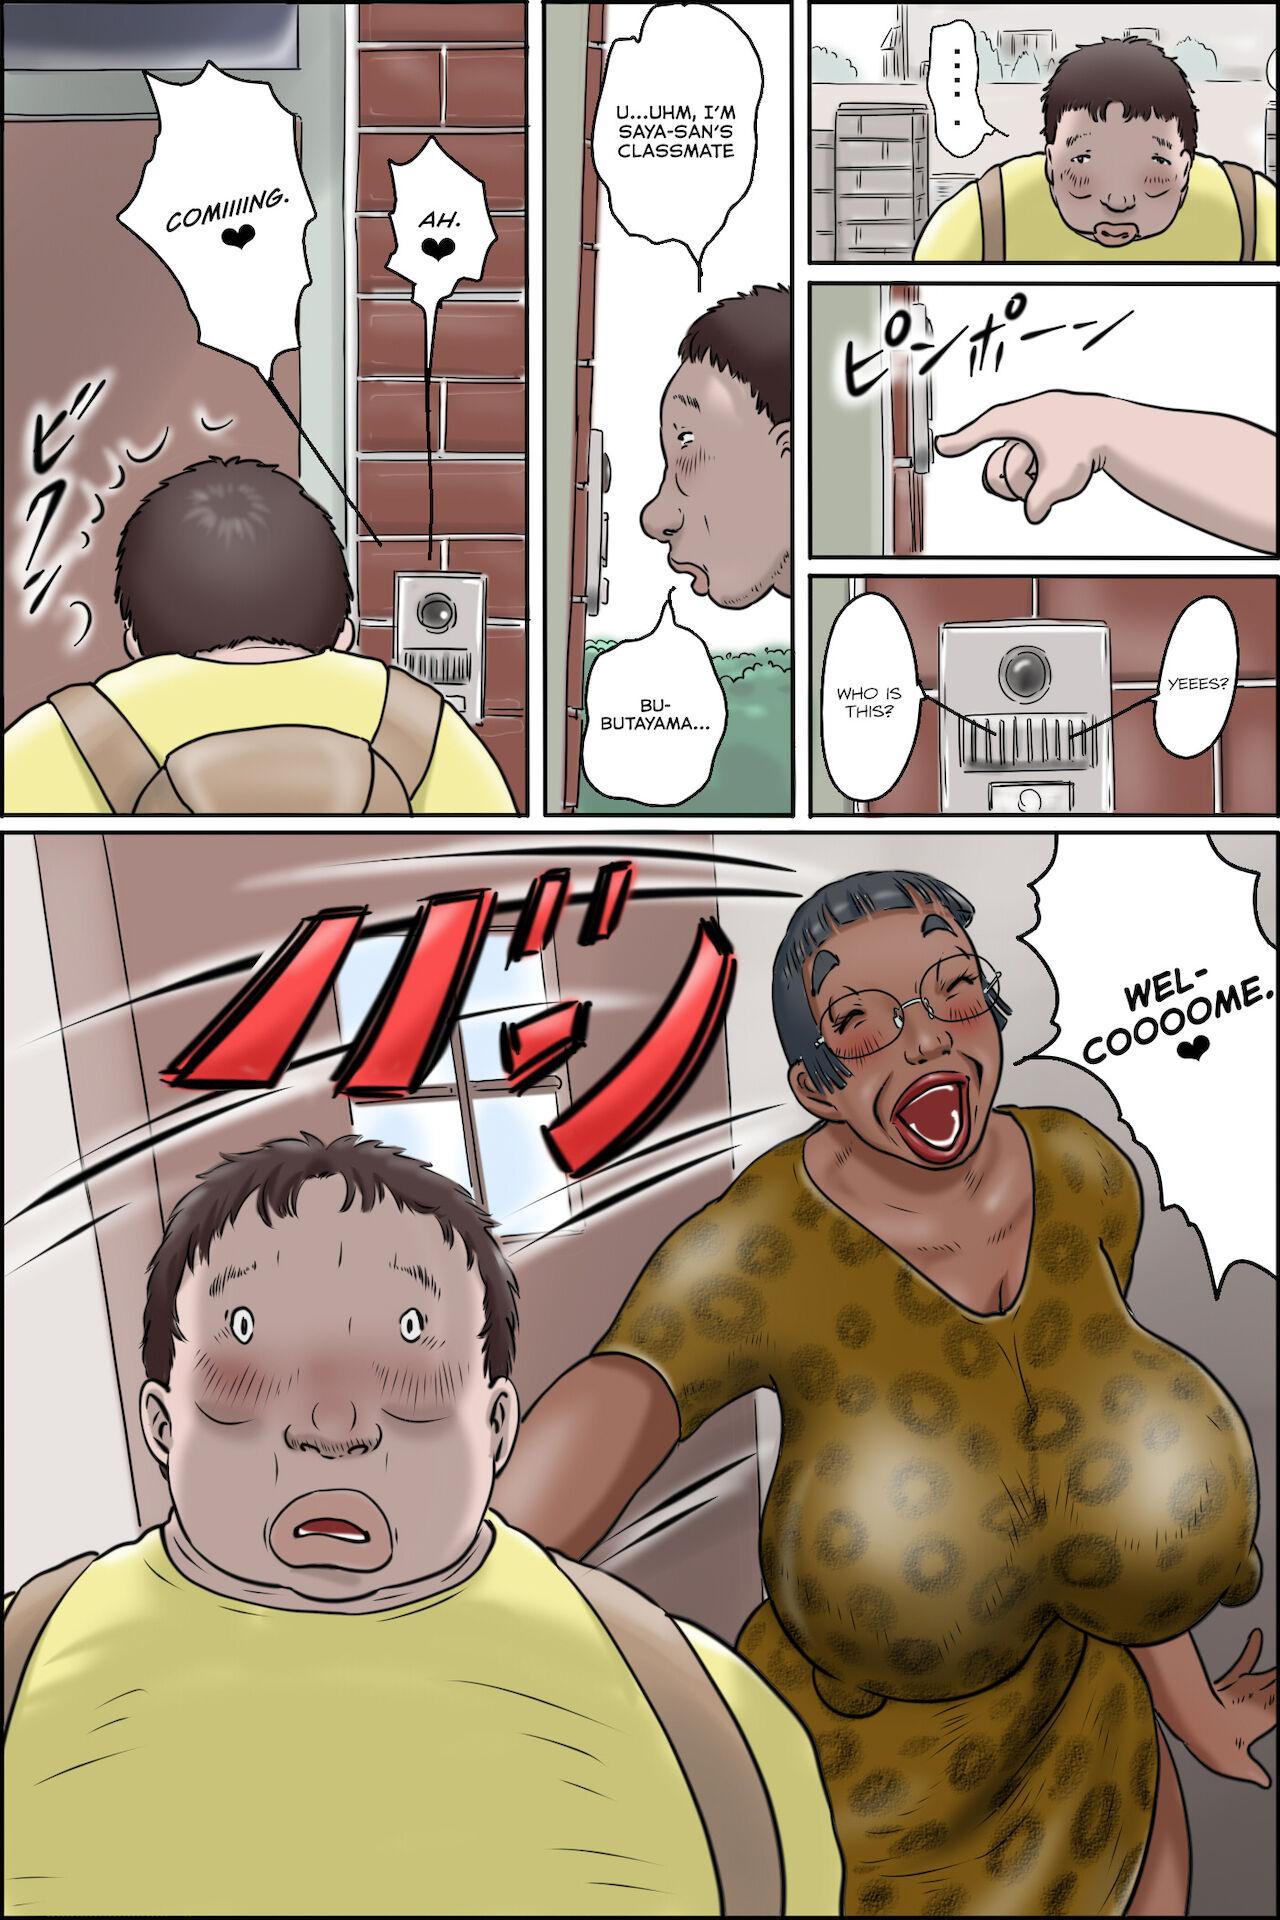 Crazy Classmate no Hahaoya ga Yappari Monster | My classmate's mother is definitely a monster - Original Vecina - Page 4